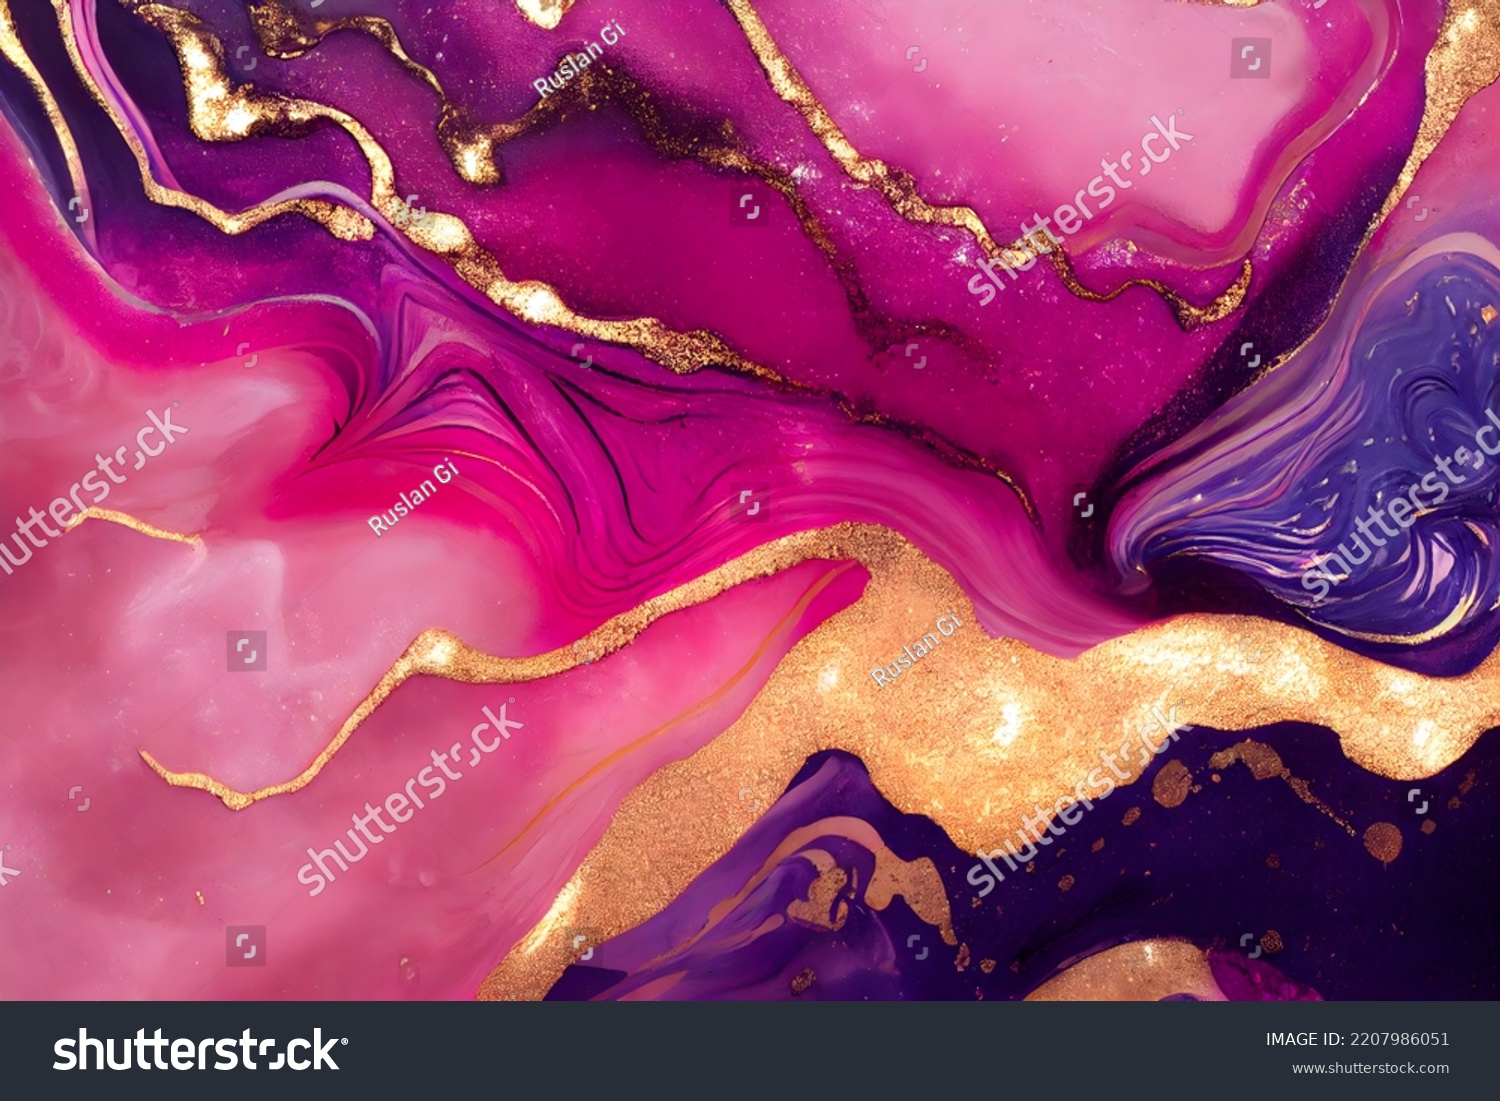 Abstract fluid art painting in alcohol ink technique. #2207986051